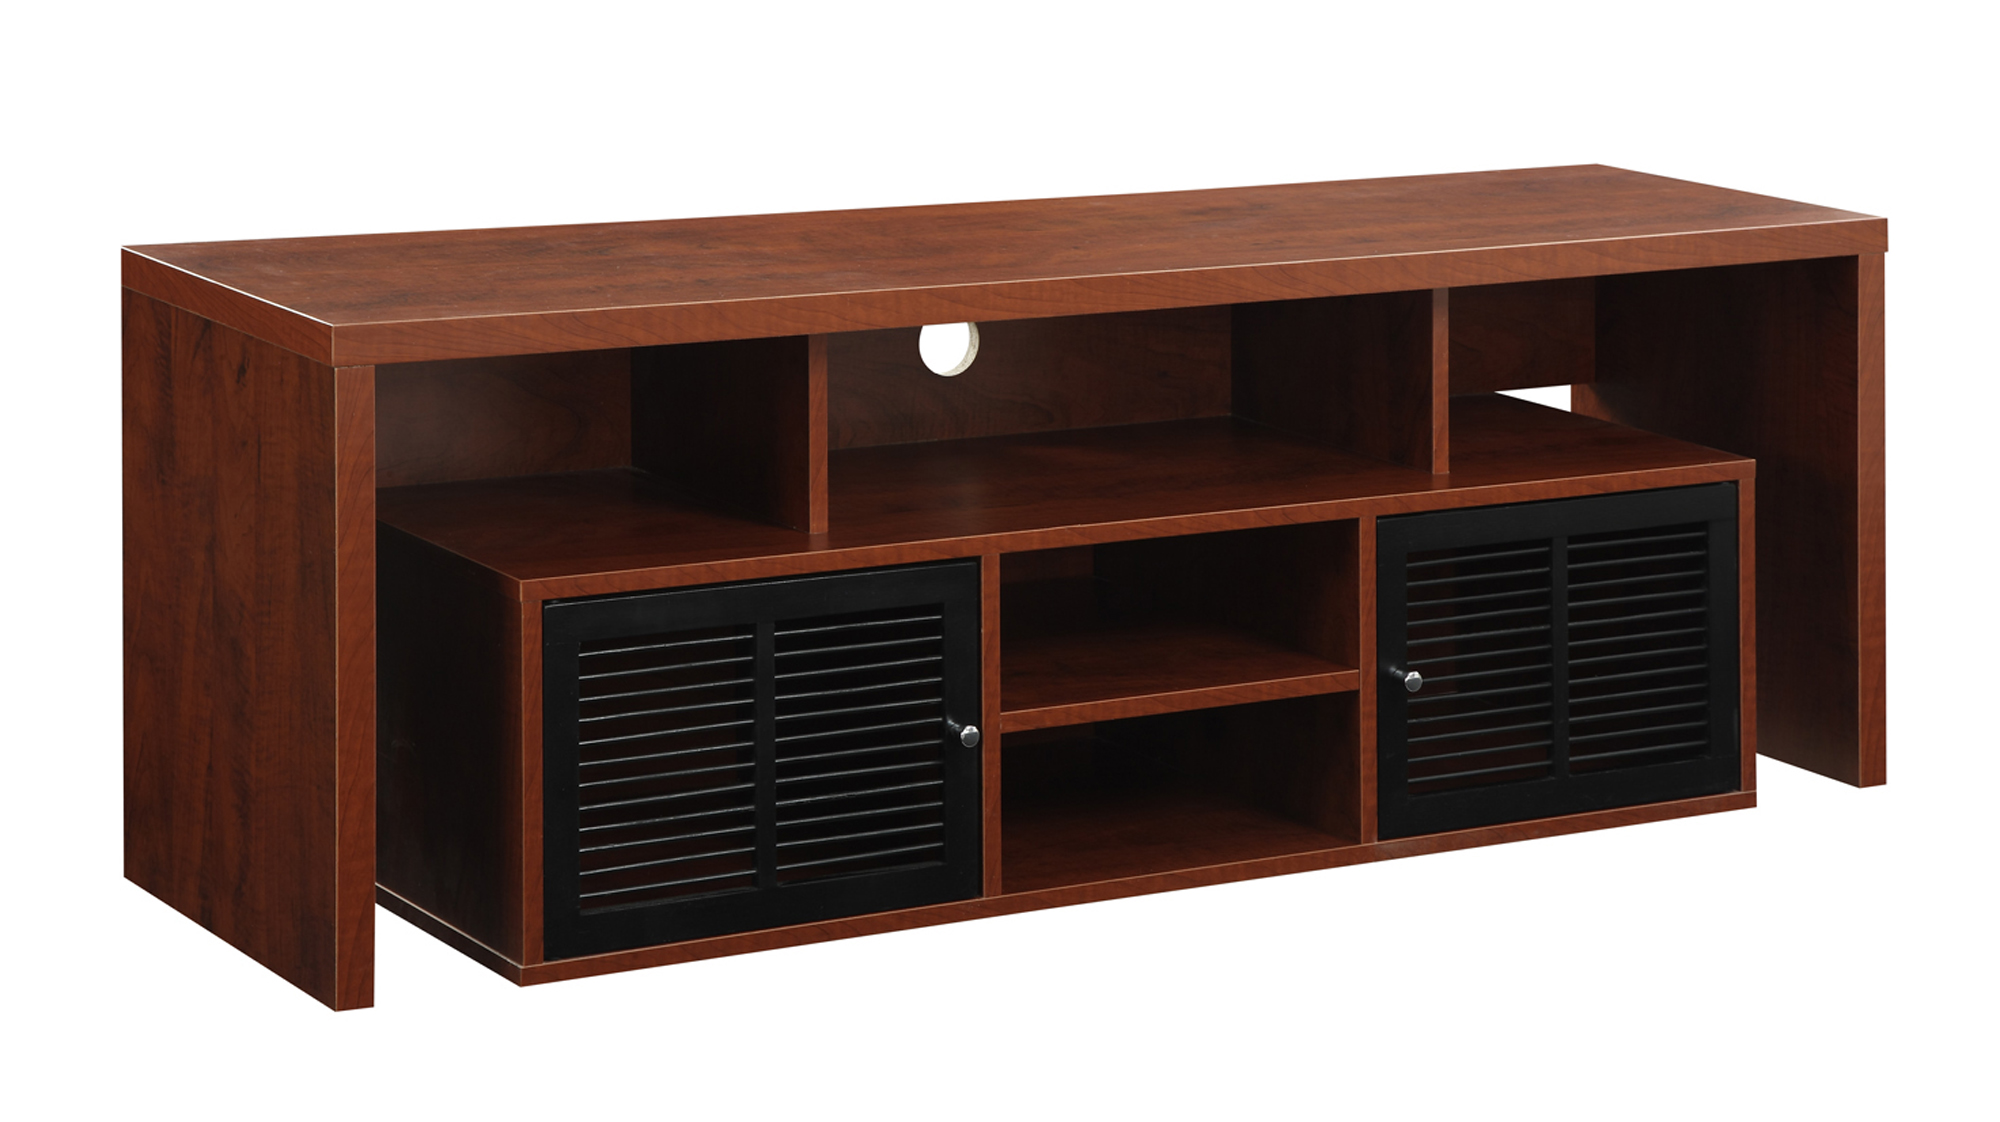 Convenience Concepts Lexington 65 inch TV Stand with Storage Cabinets and Shelves, Cherry - image 3 of 4